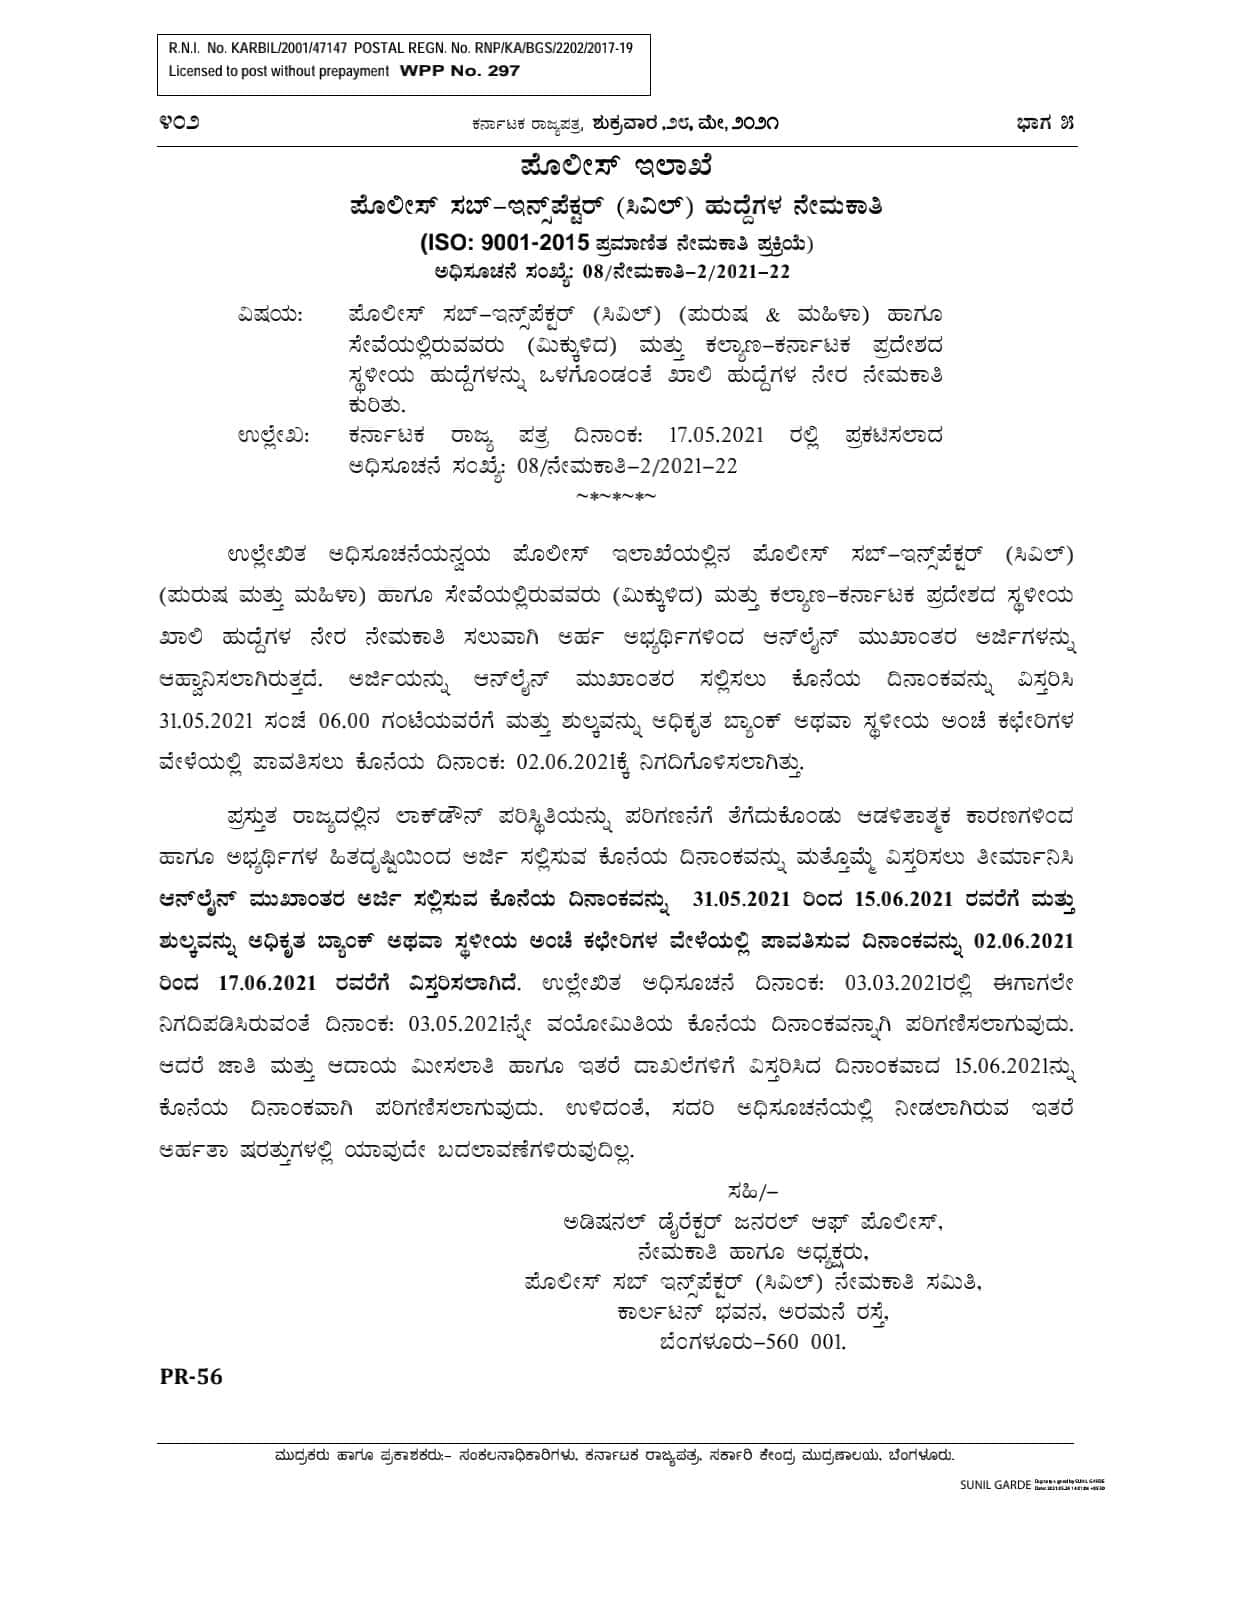 Direct recruitment of vacancies including Police Sub-Inspector (Civil), Male and Female & Service (Residual) and Local posts of Welfare Karnataka